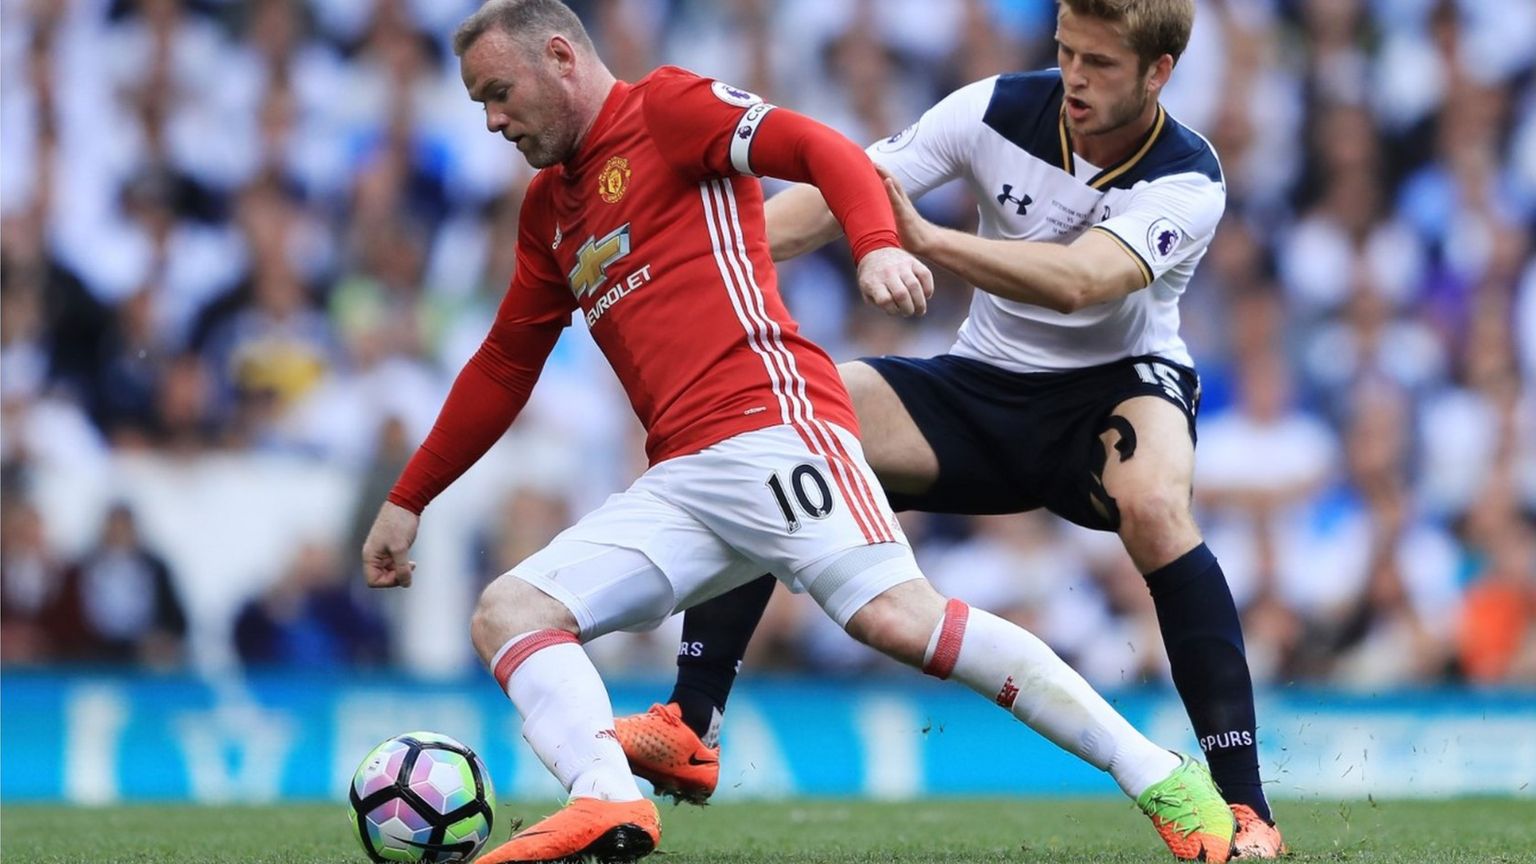 Wayne Rooney in action for Manchester United against Tottenham